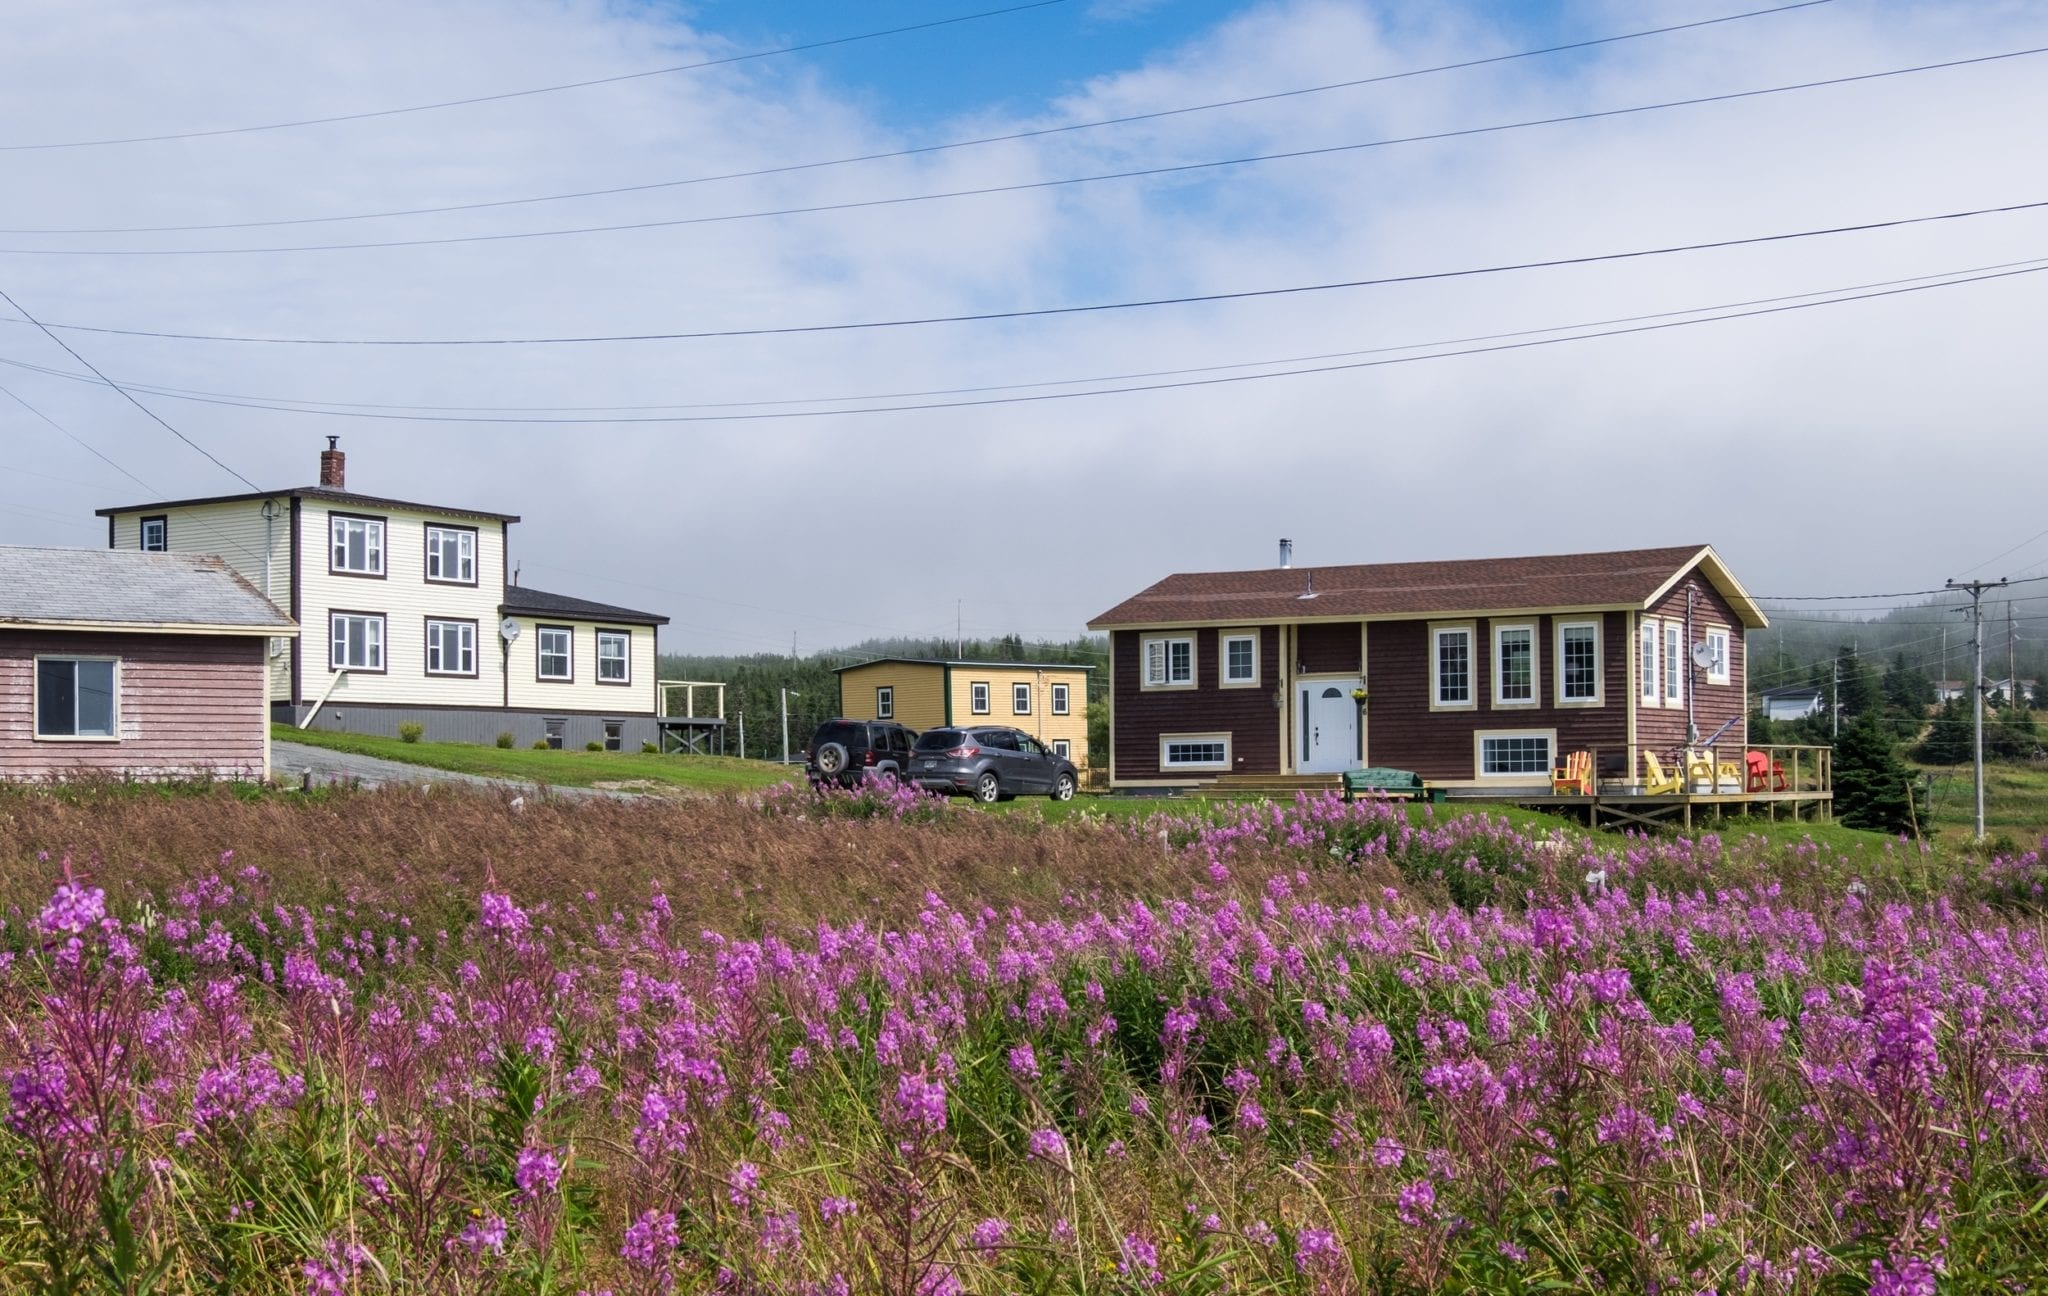 Cottages perched in front of a field of bright purple flowers underneath a cloudy blue and white sky.